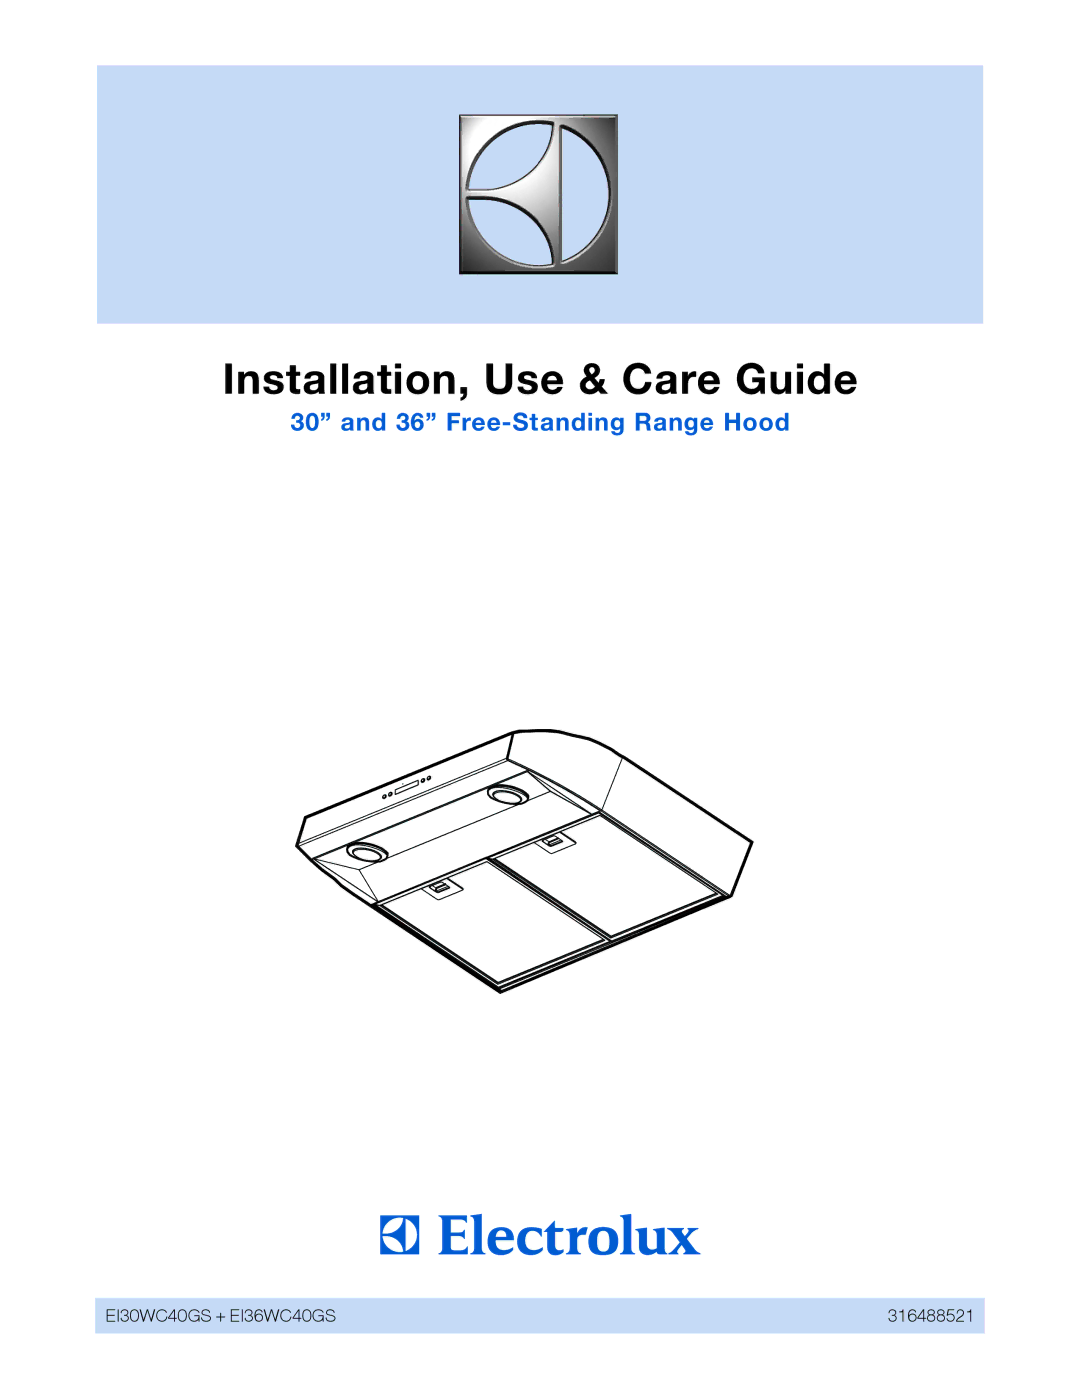 Electrolux EI30WC40GS, EI36WC40GS, 316488521 manual Installation, Use & Care Guide 